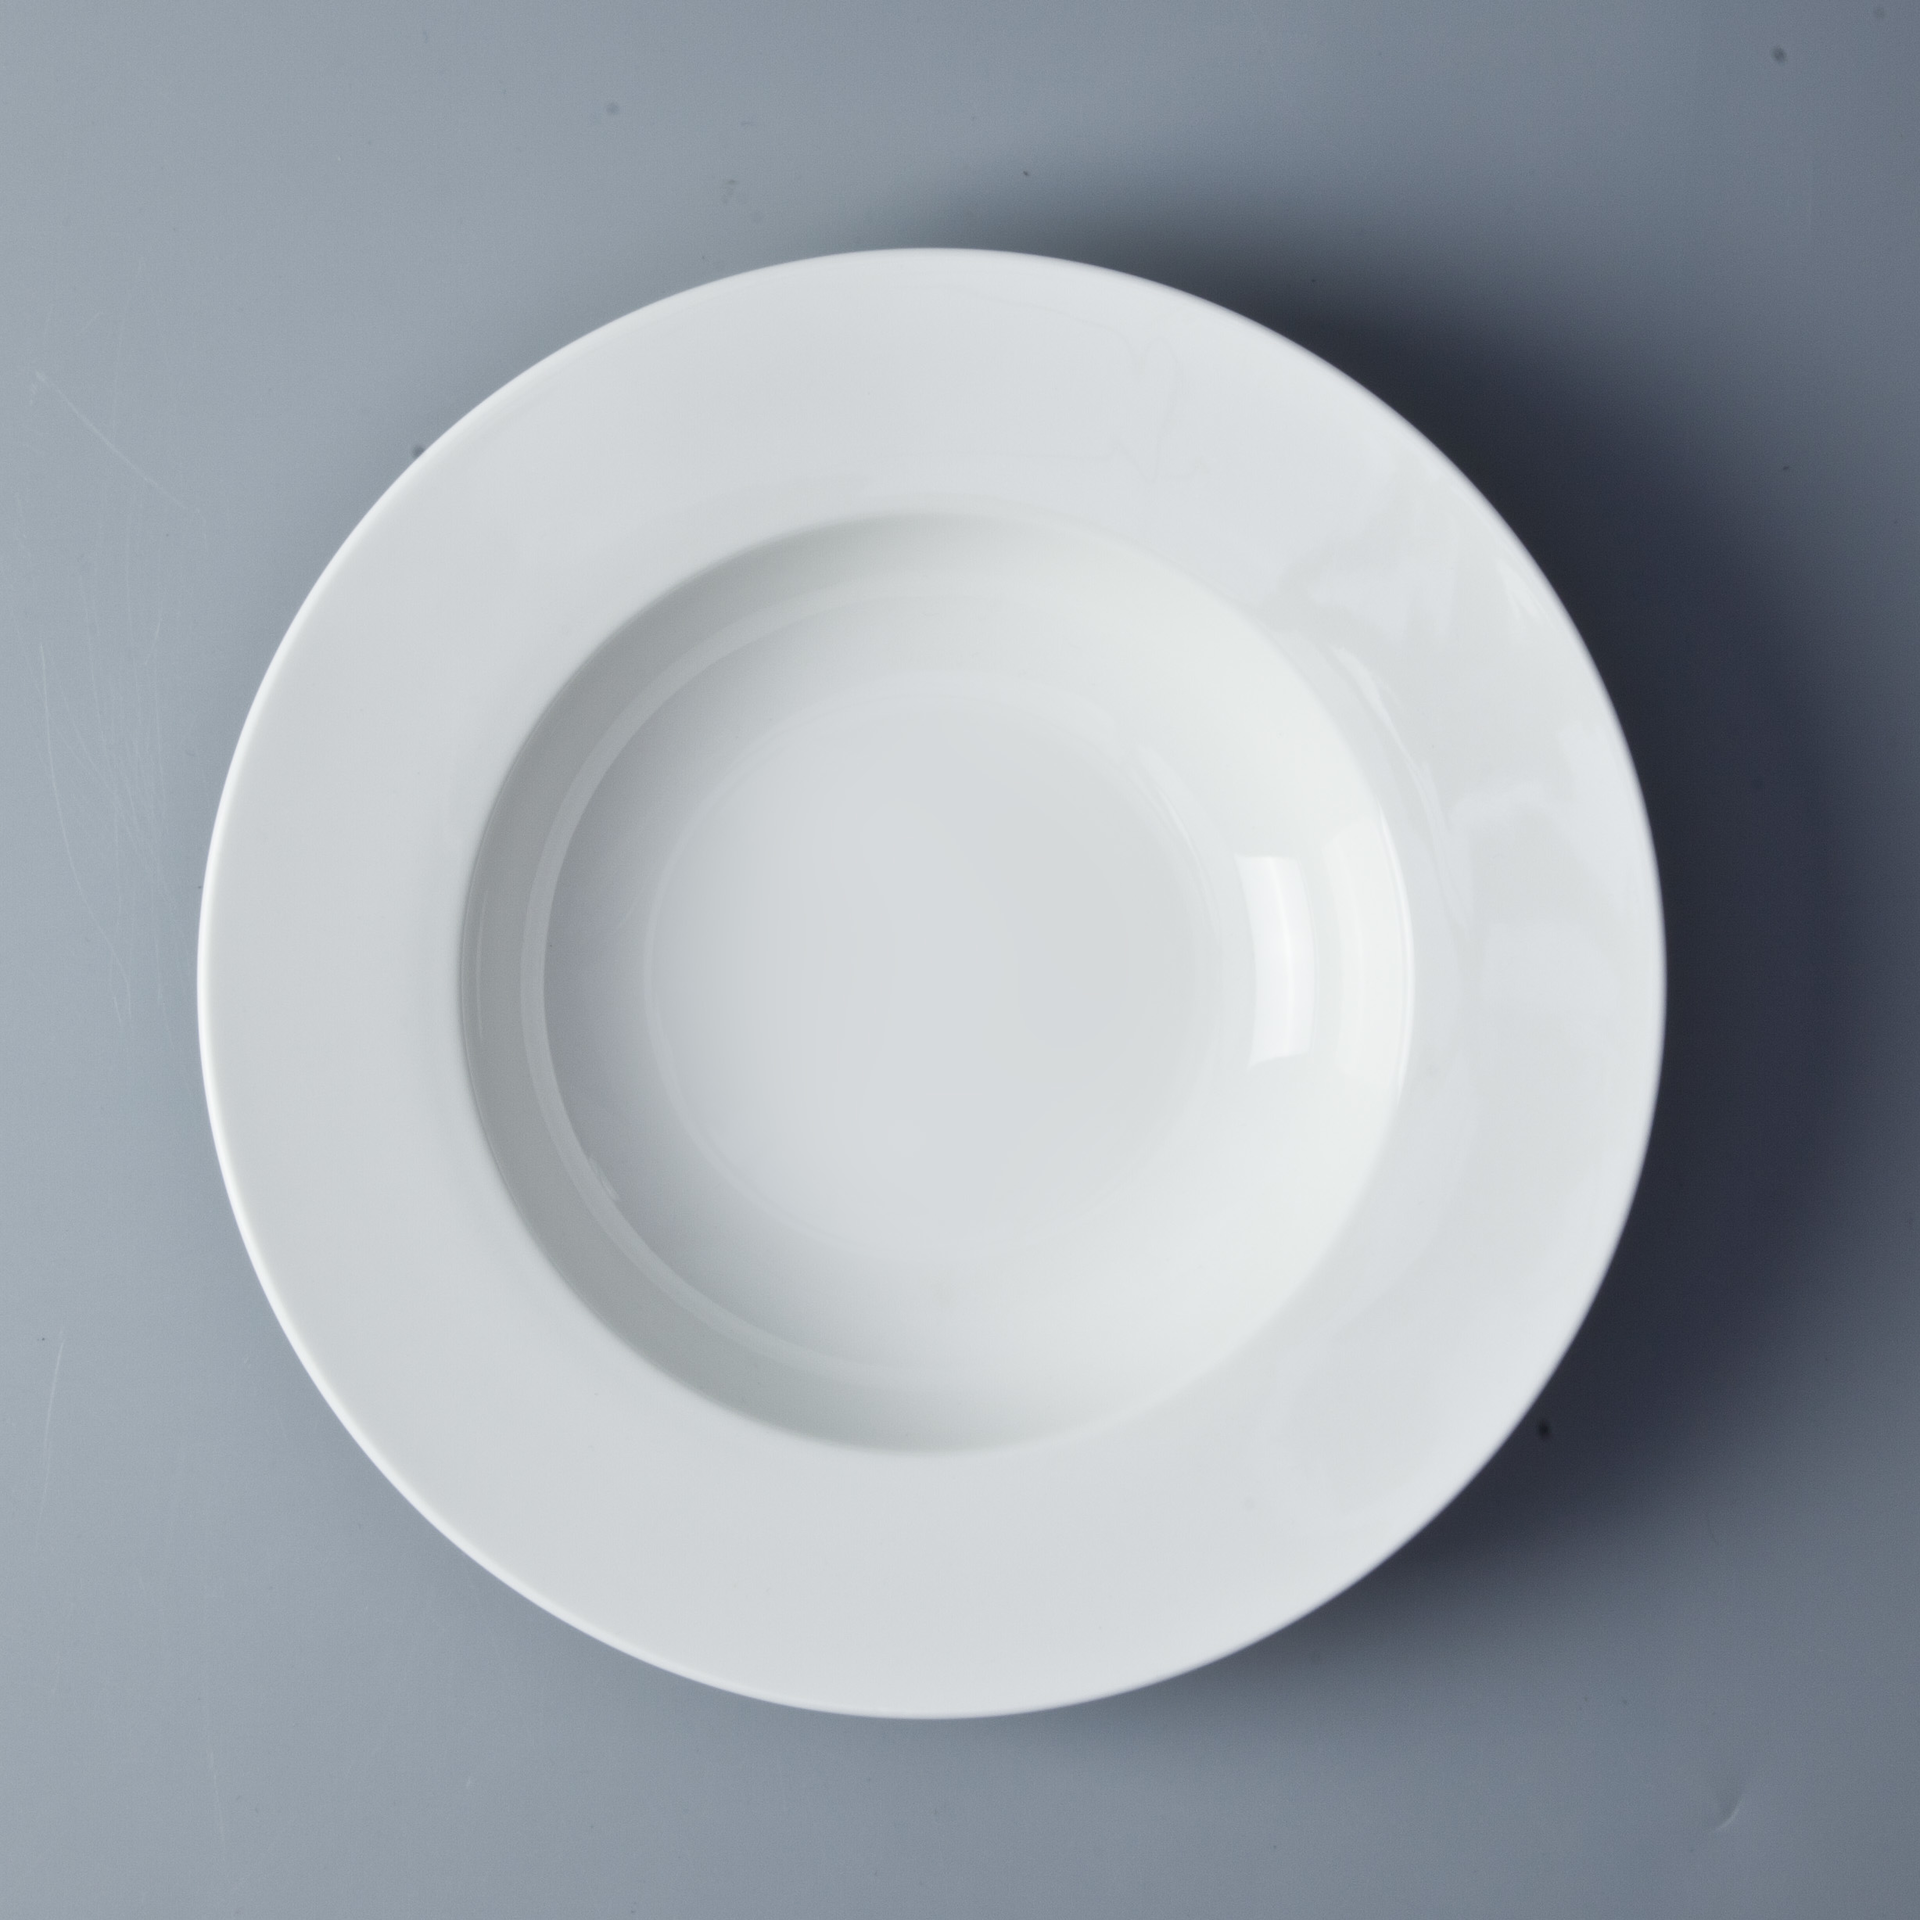 Hotel Restaurant Supplies Tableware Crockery Heated Plates,Dishes Pasta Bowls, Customize Plate For Catering@